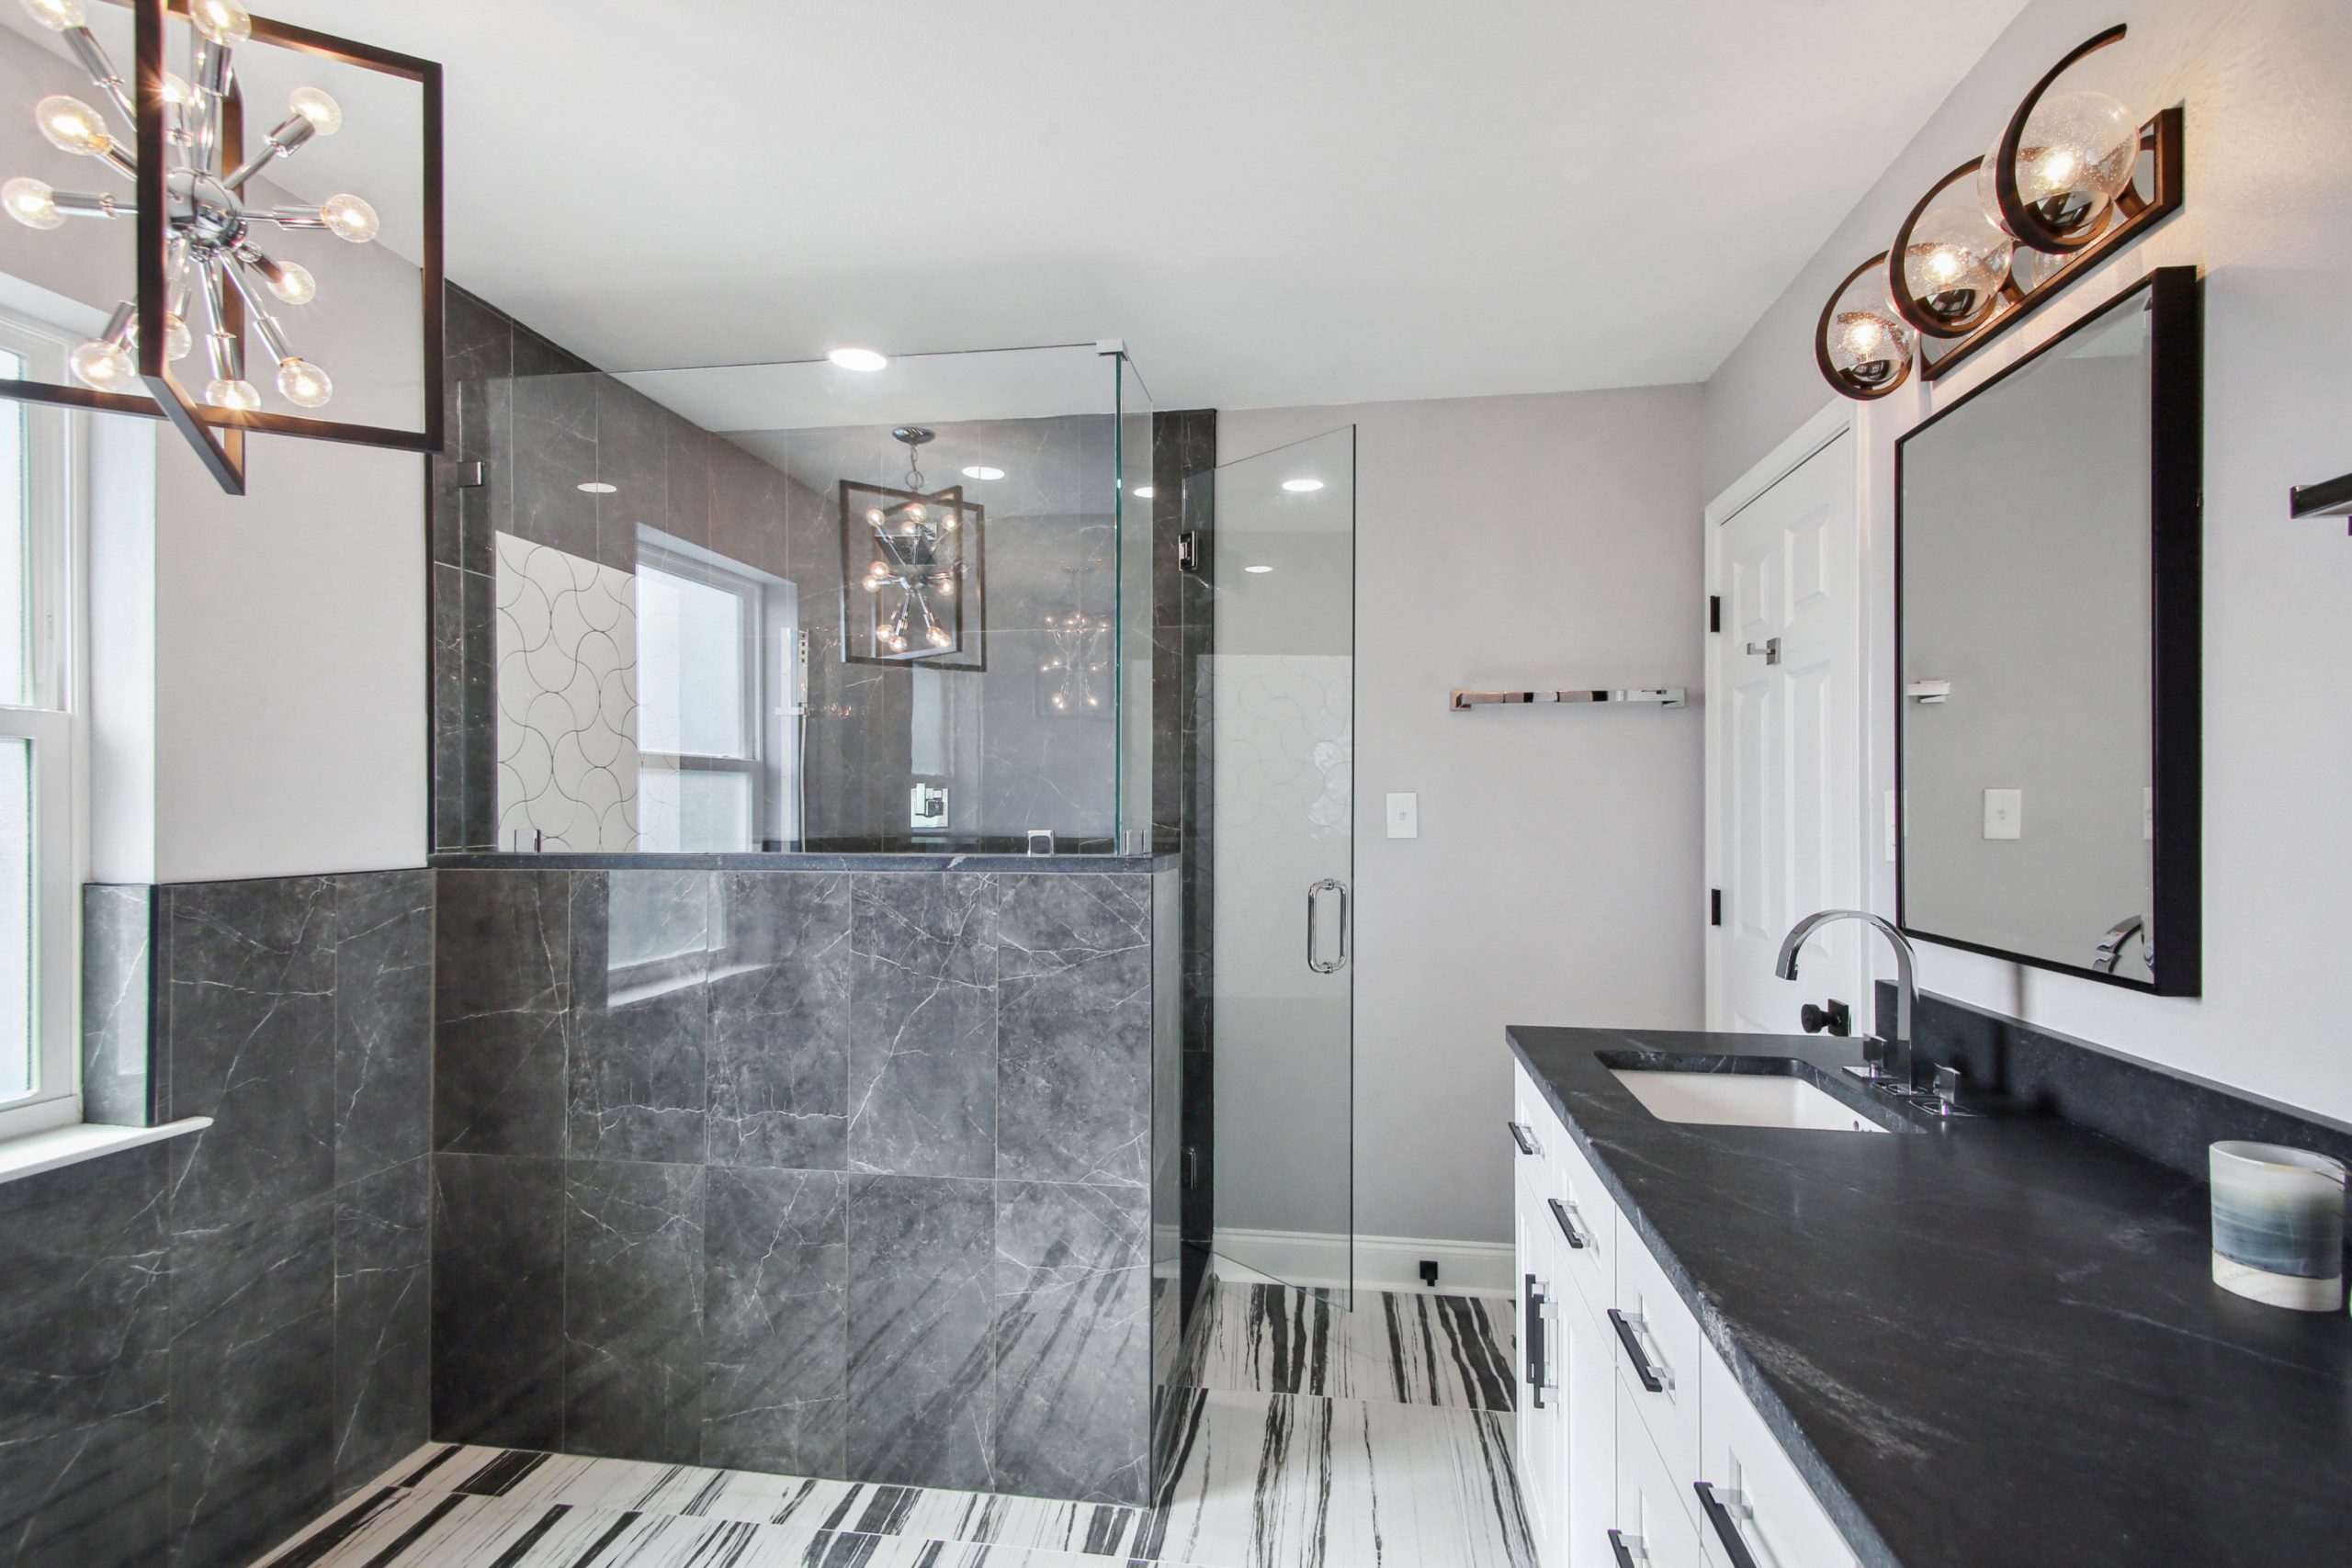 Steeple House Luxury Bathroom Renovation designed and built by DMG Design+Build